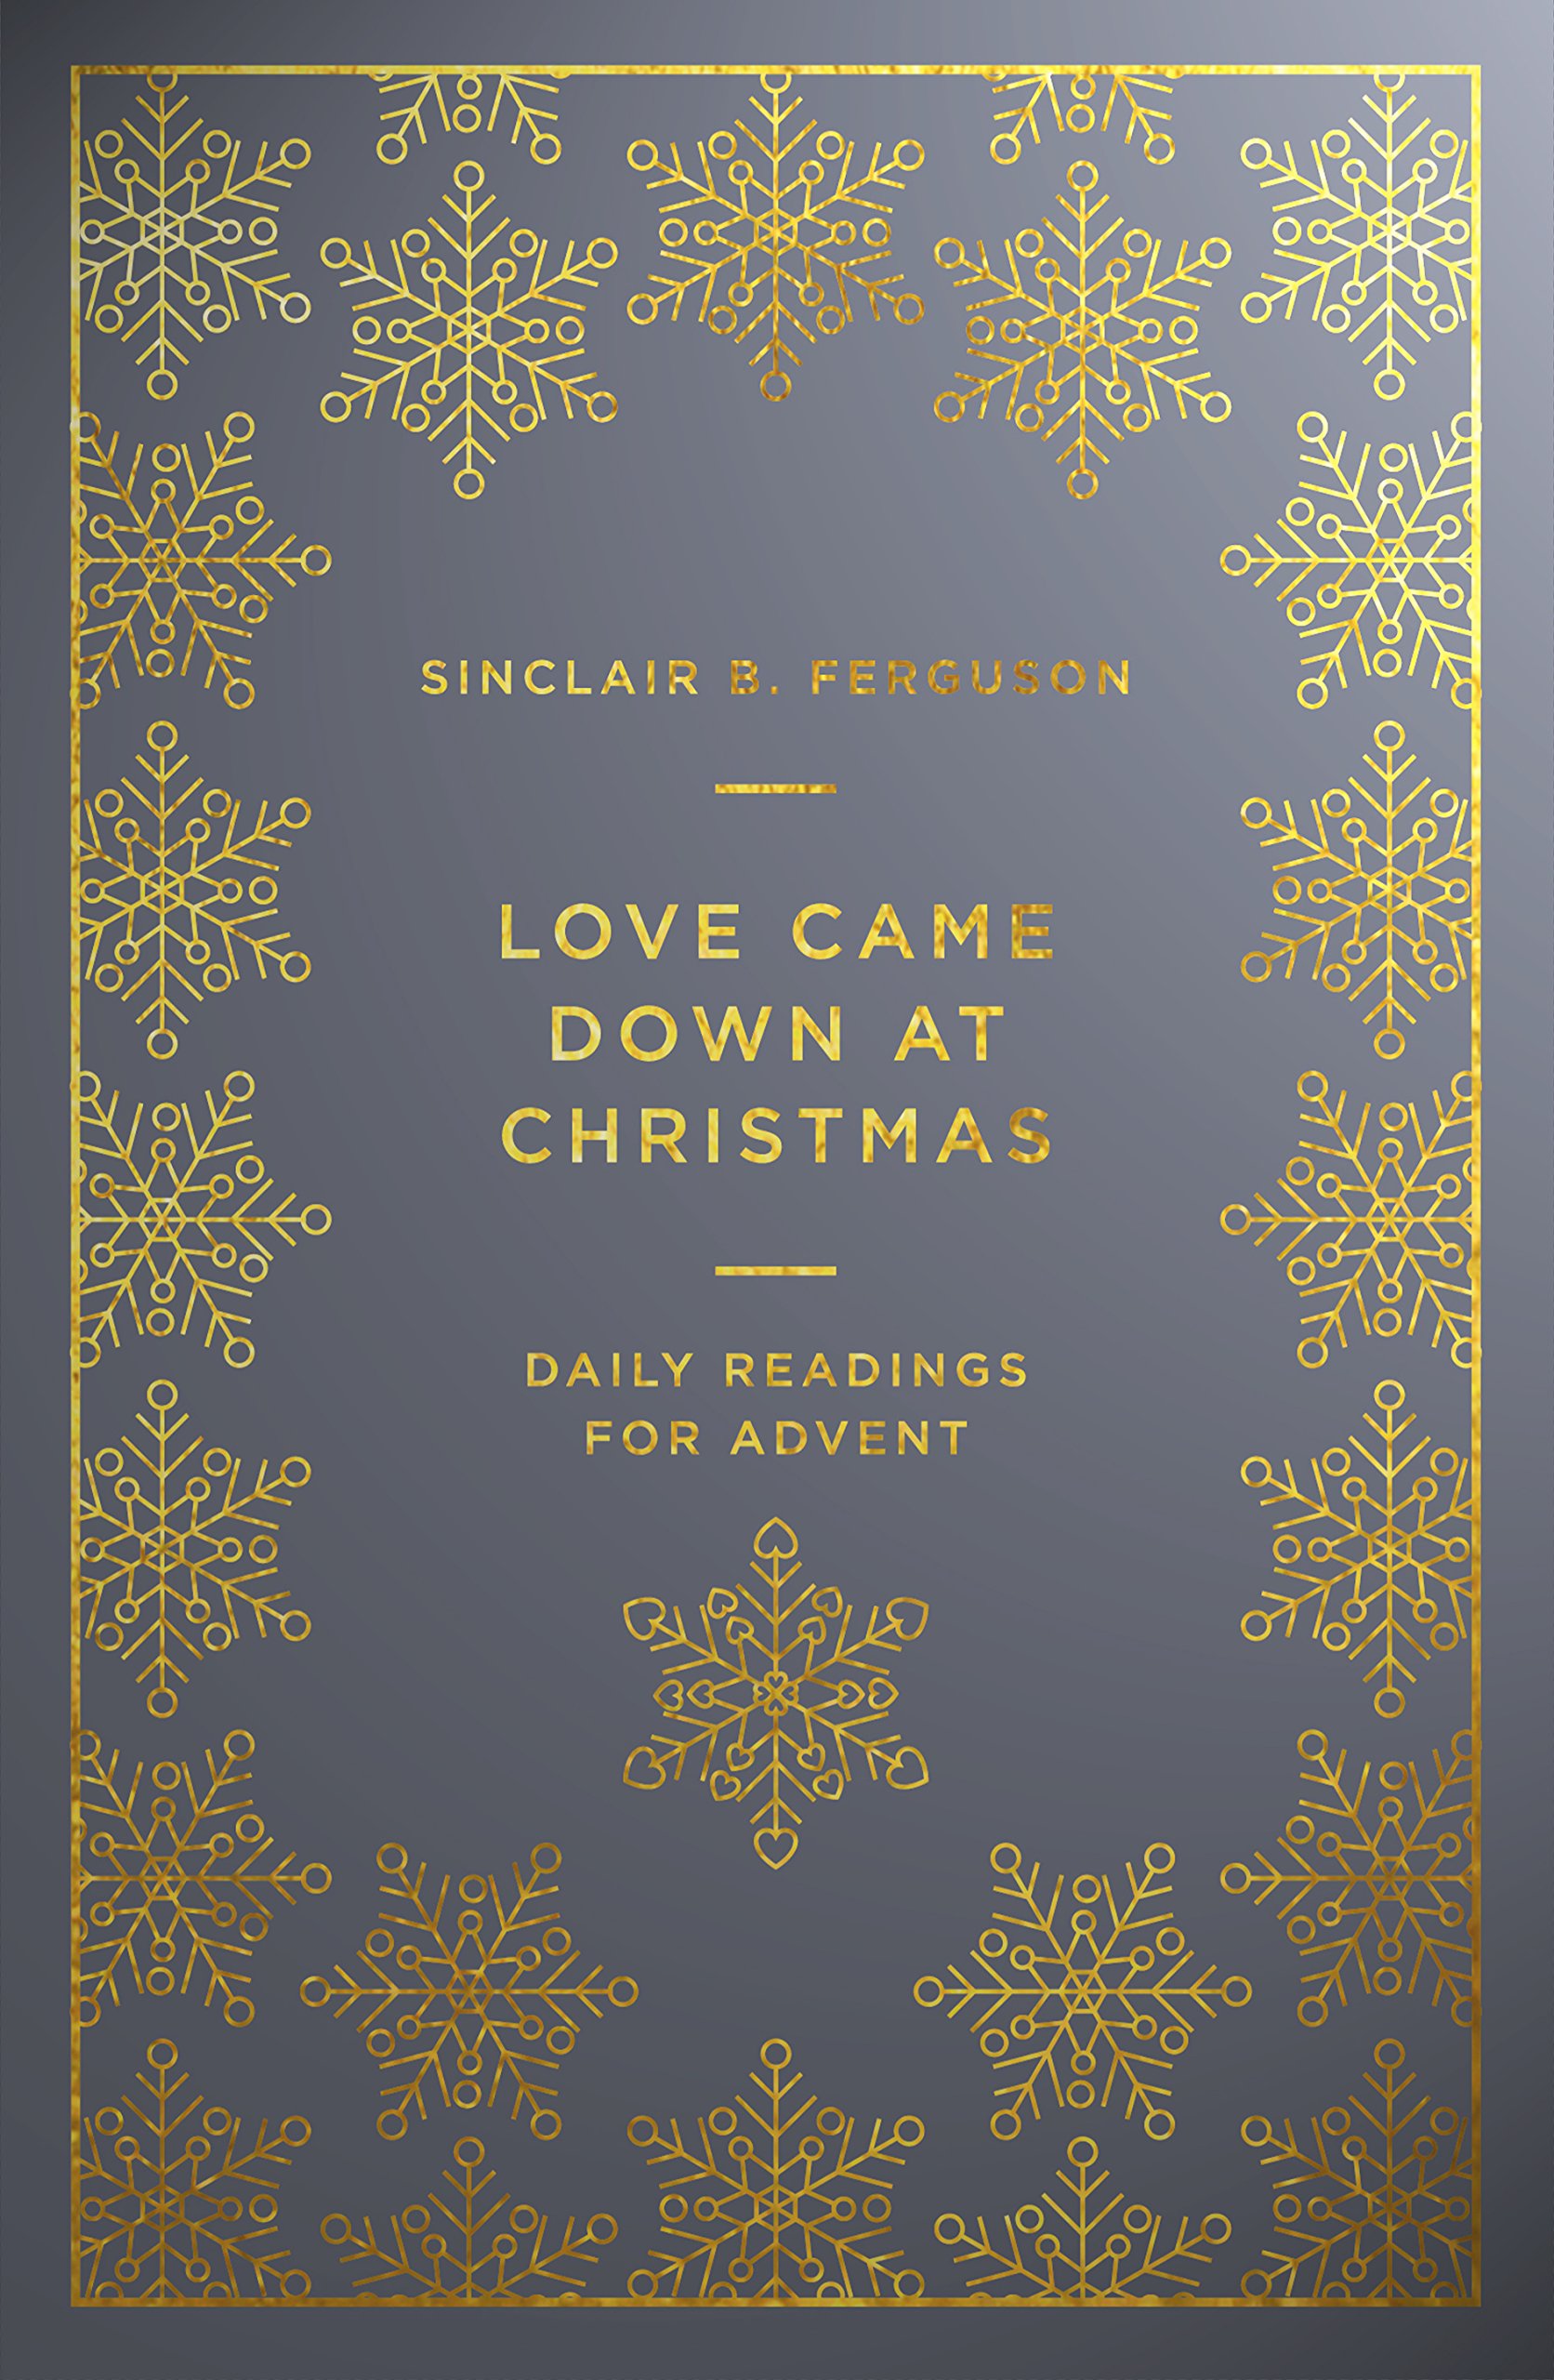 Book Notice: LOVE CAME DOWN AT CHRISTMAS: DAILY READINGS FOR ADVENT, by Sinclair B. Ferguson